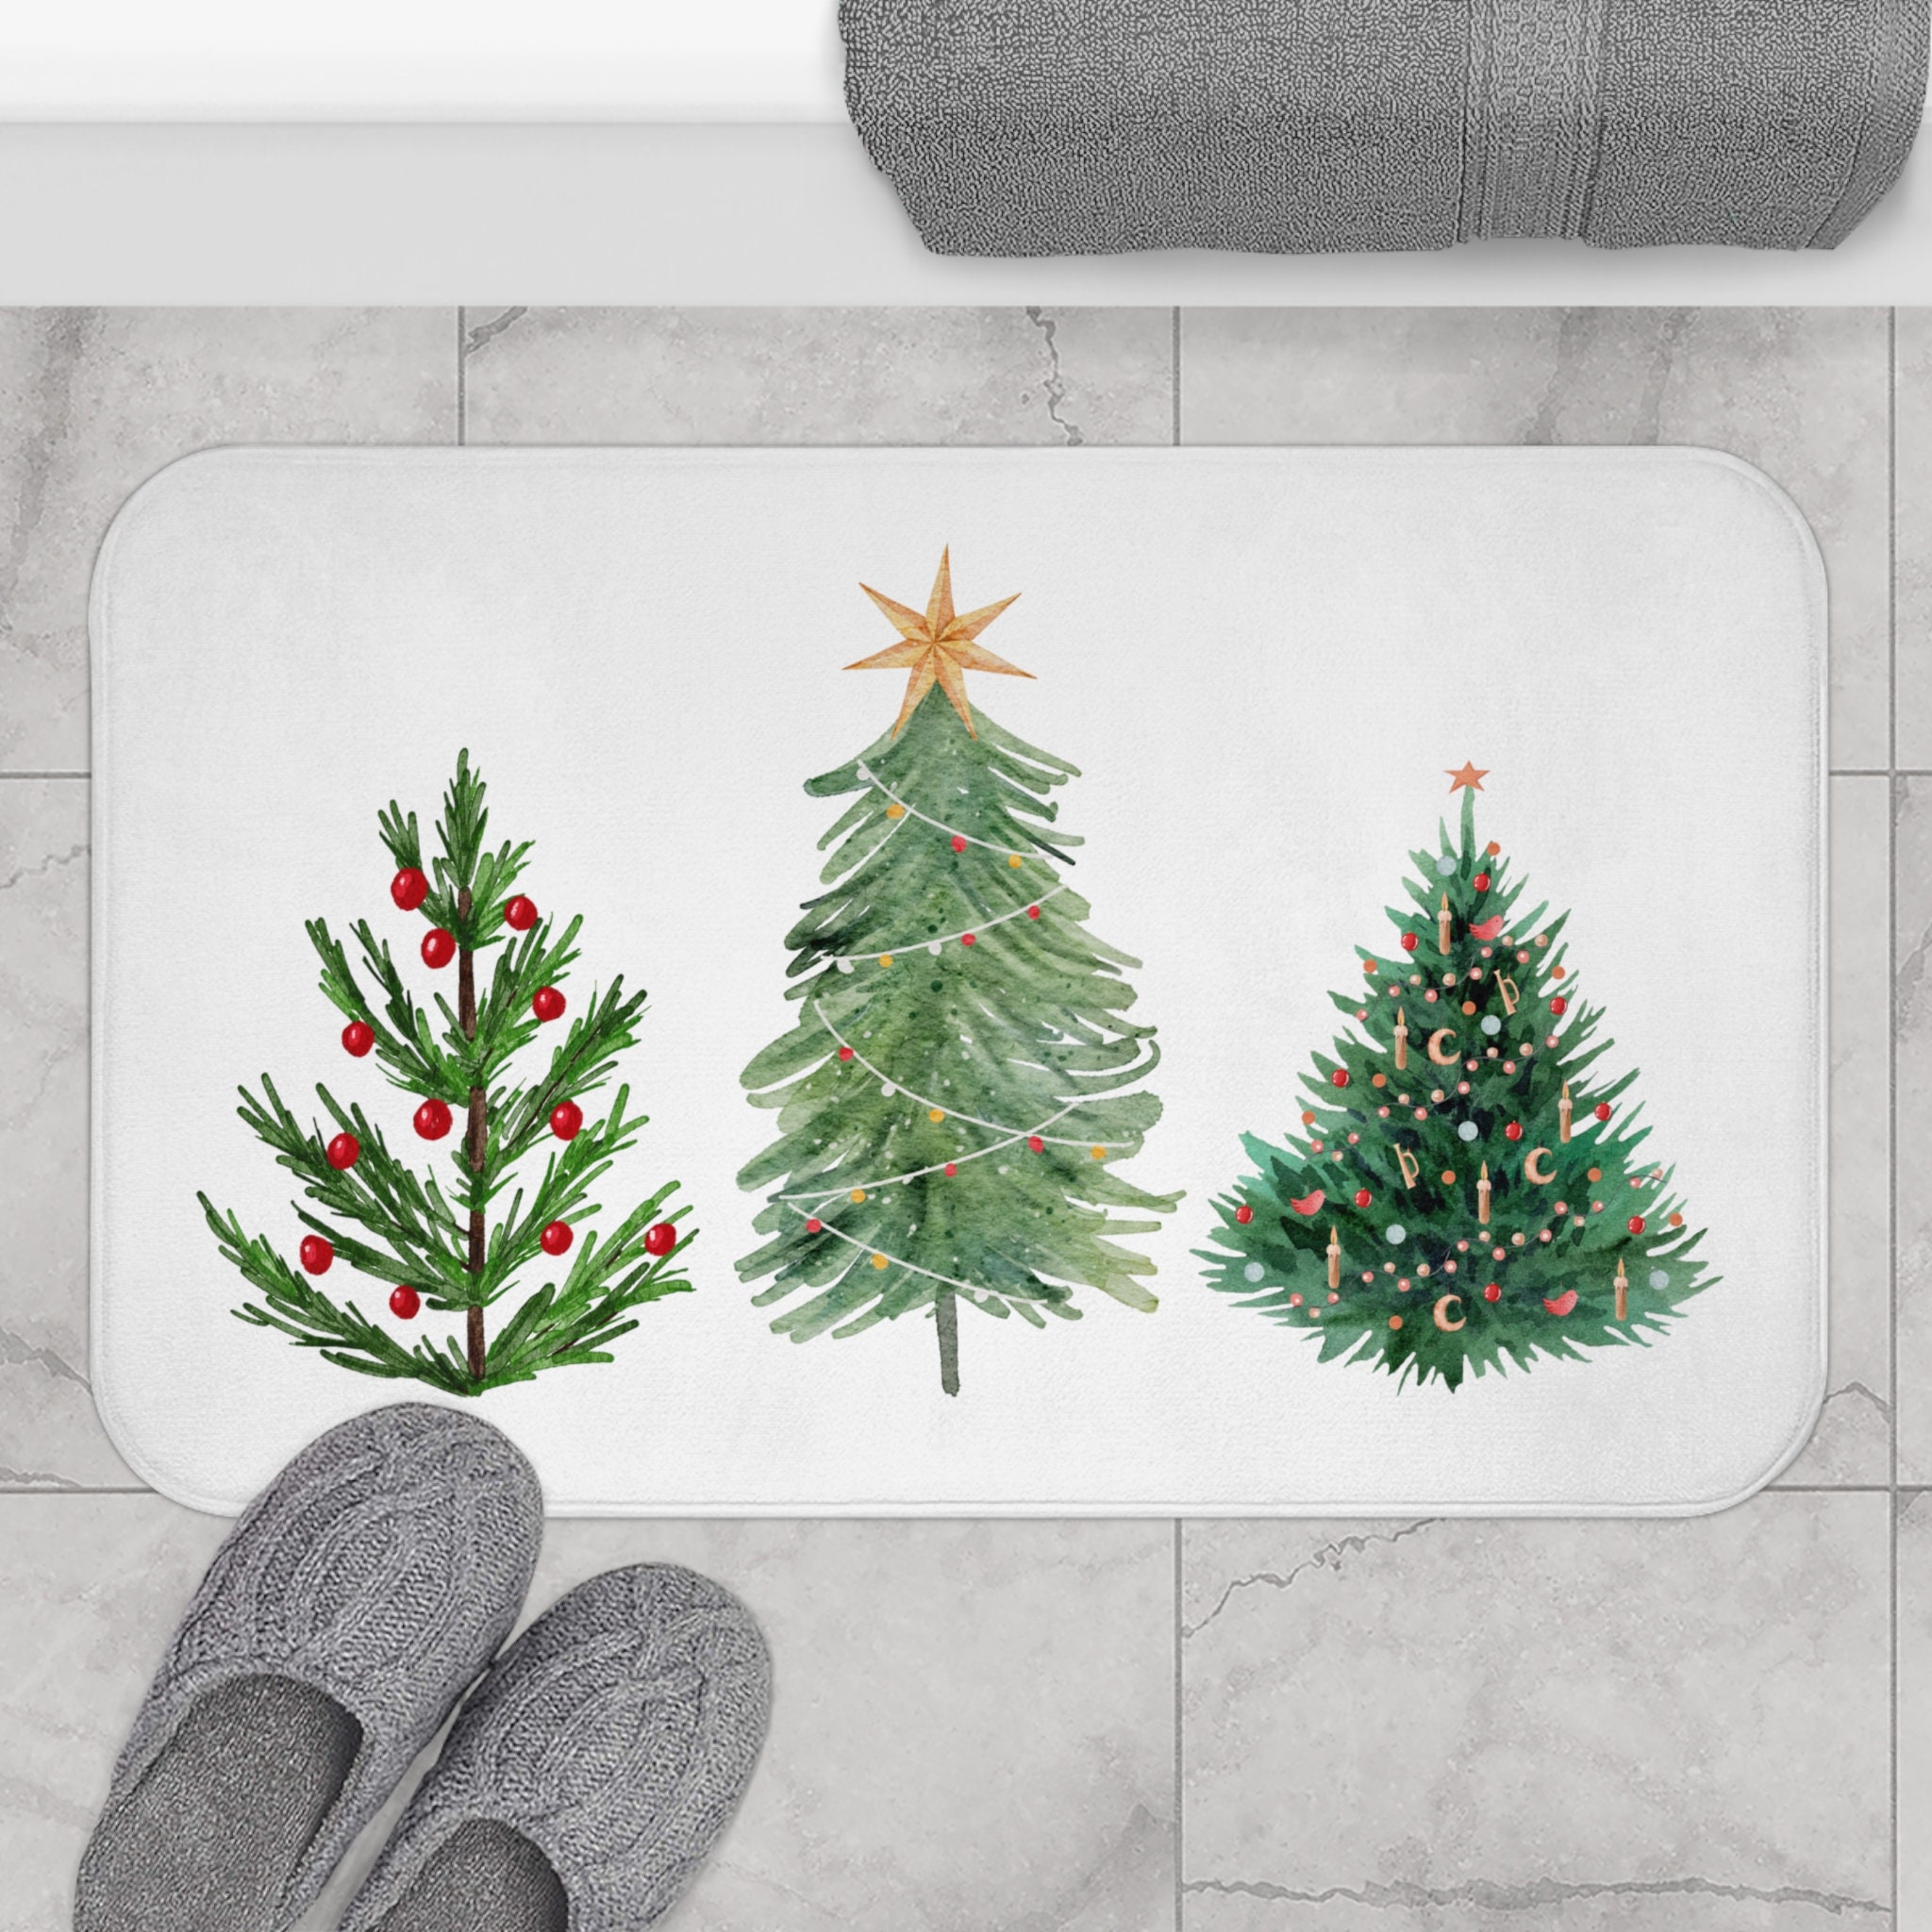  Christmas Dish Drying Mat for Kitchen Counter Gnome Xmas Tree  Ball Drying Pad Absorbent Drying Mats for Countertops Sinks Draining Racks  Pine Needles Snowaflake Snow Red Xmas Decor 16x18 Inch: Home